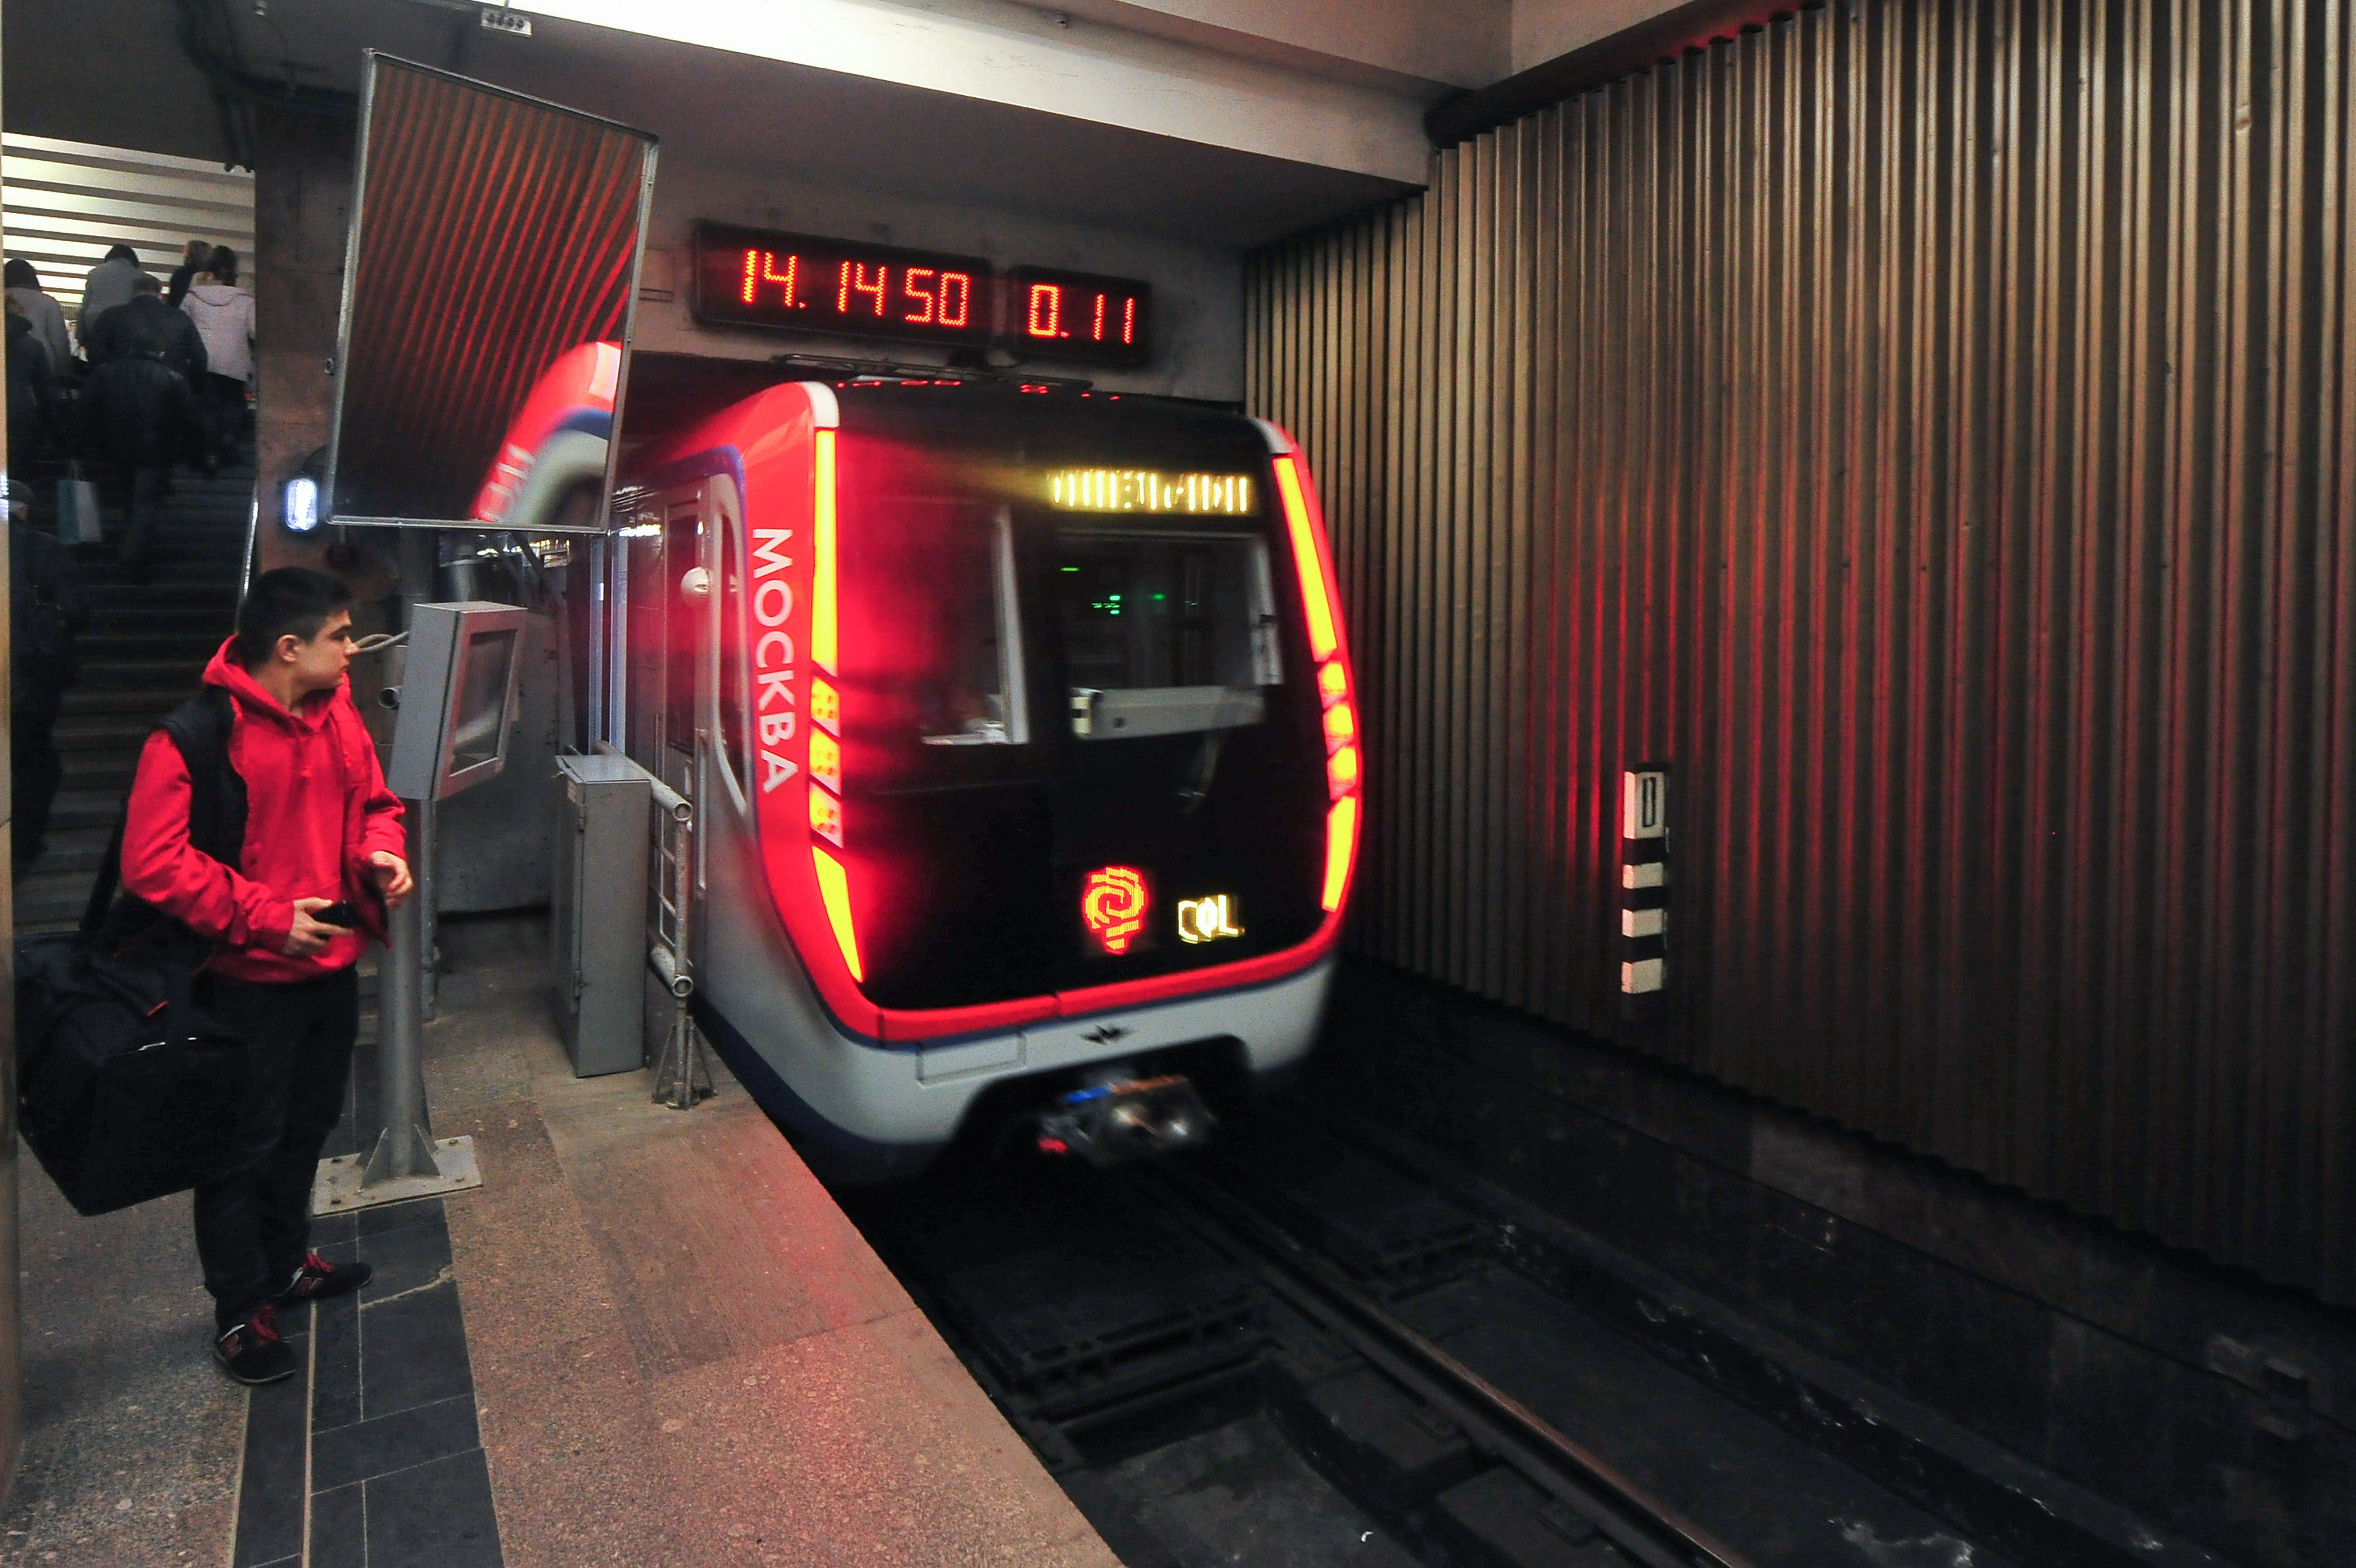 For now, trains from the 765-series "Moscow" will operate on the purple line, where the oldest cars are still in use.